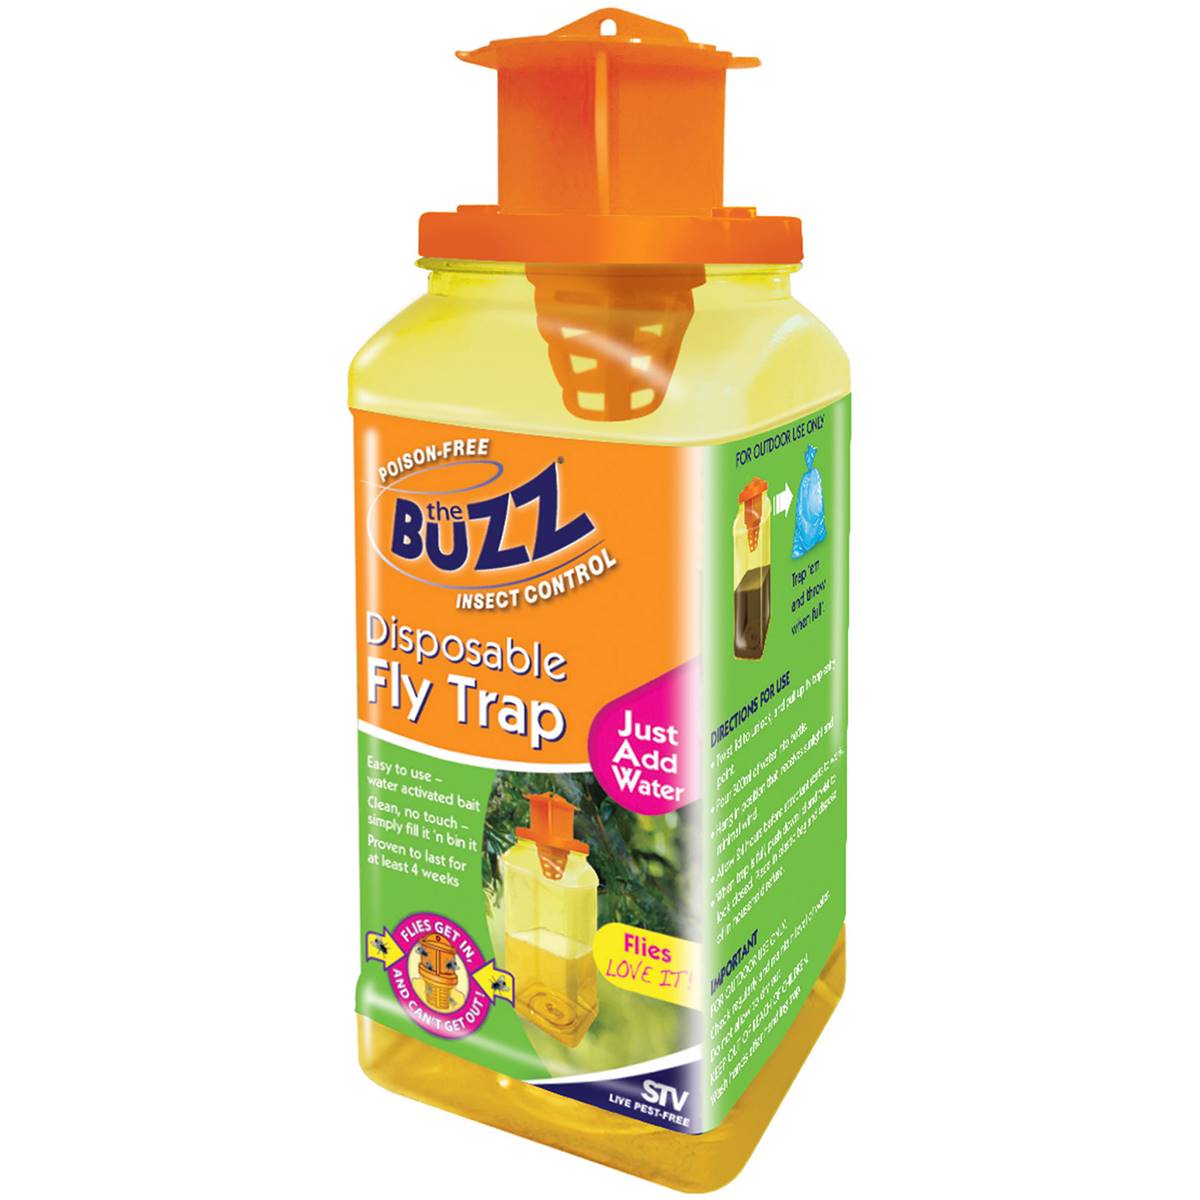 the buzz disposable fly trap review